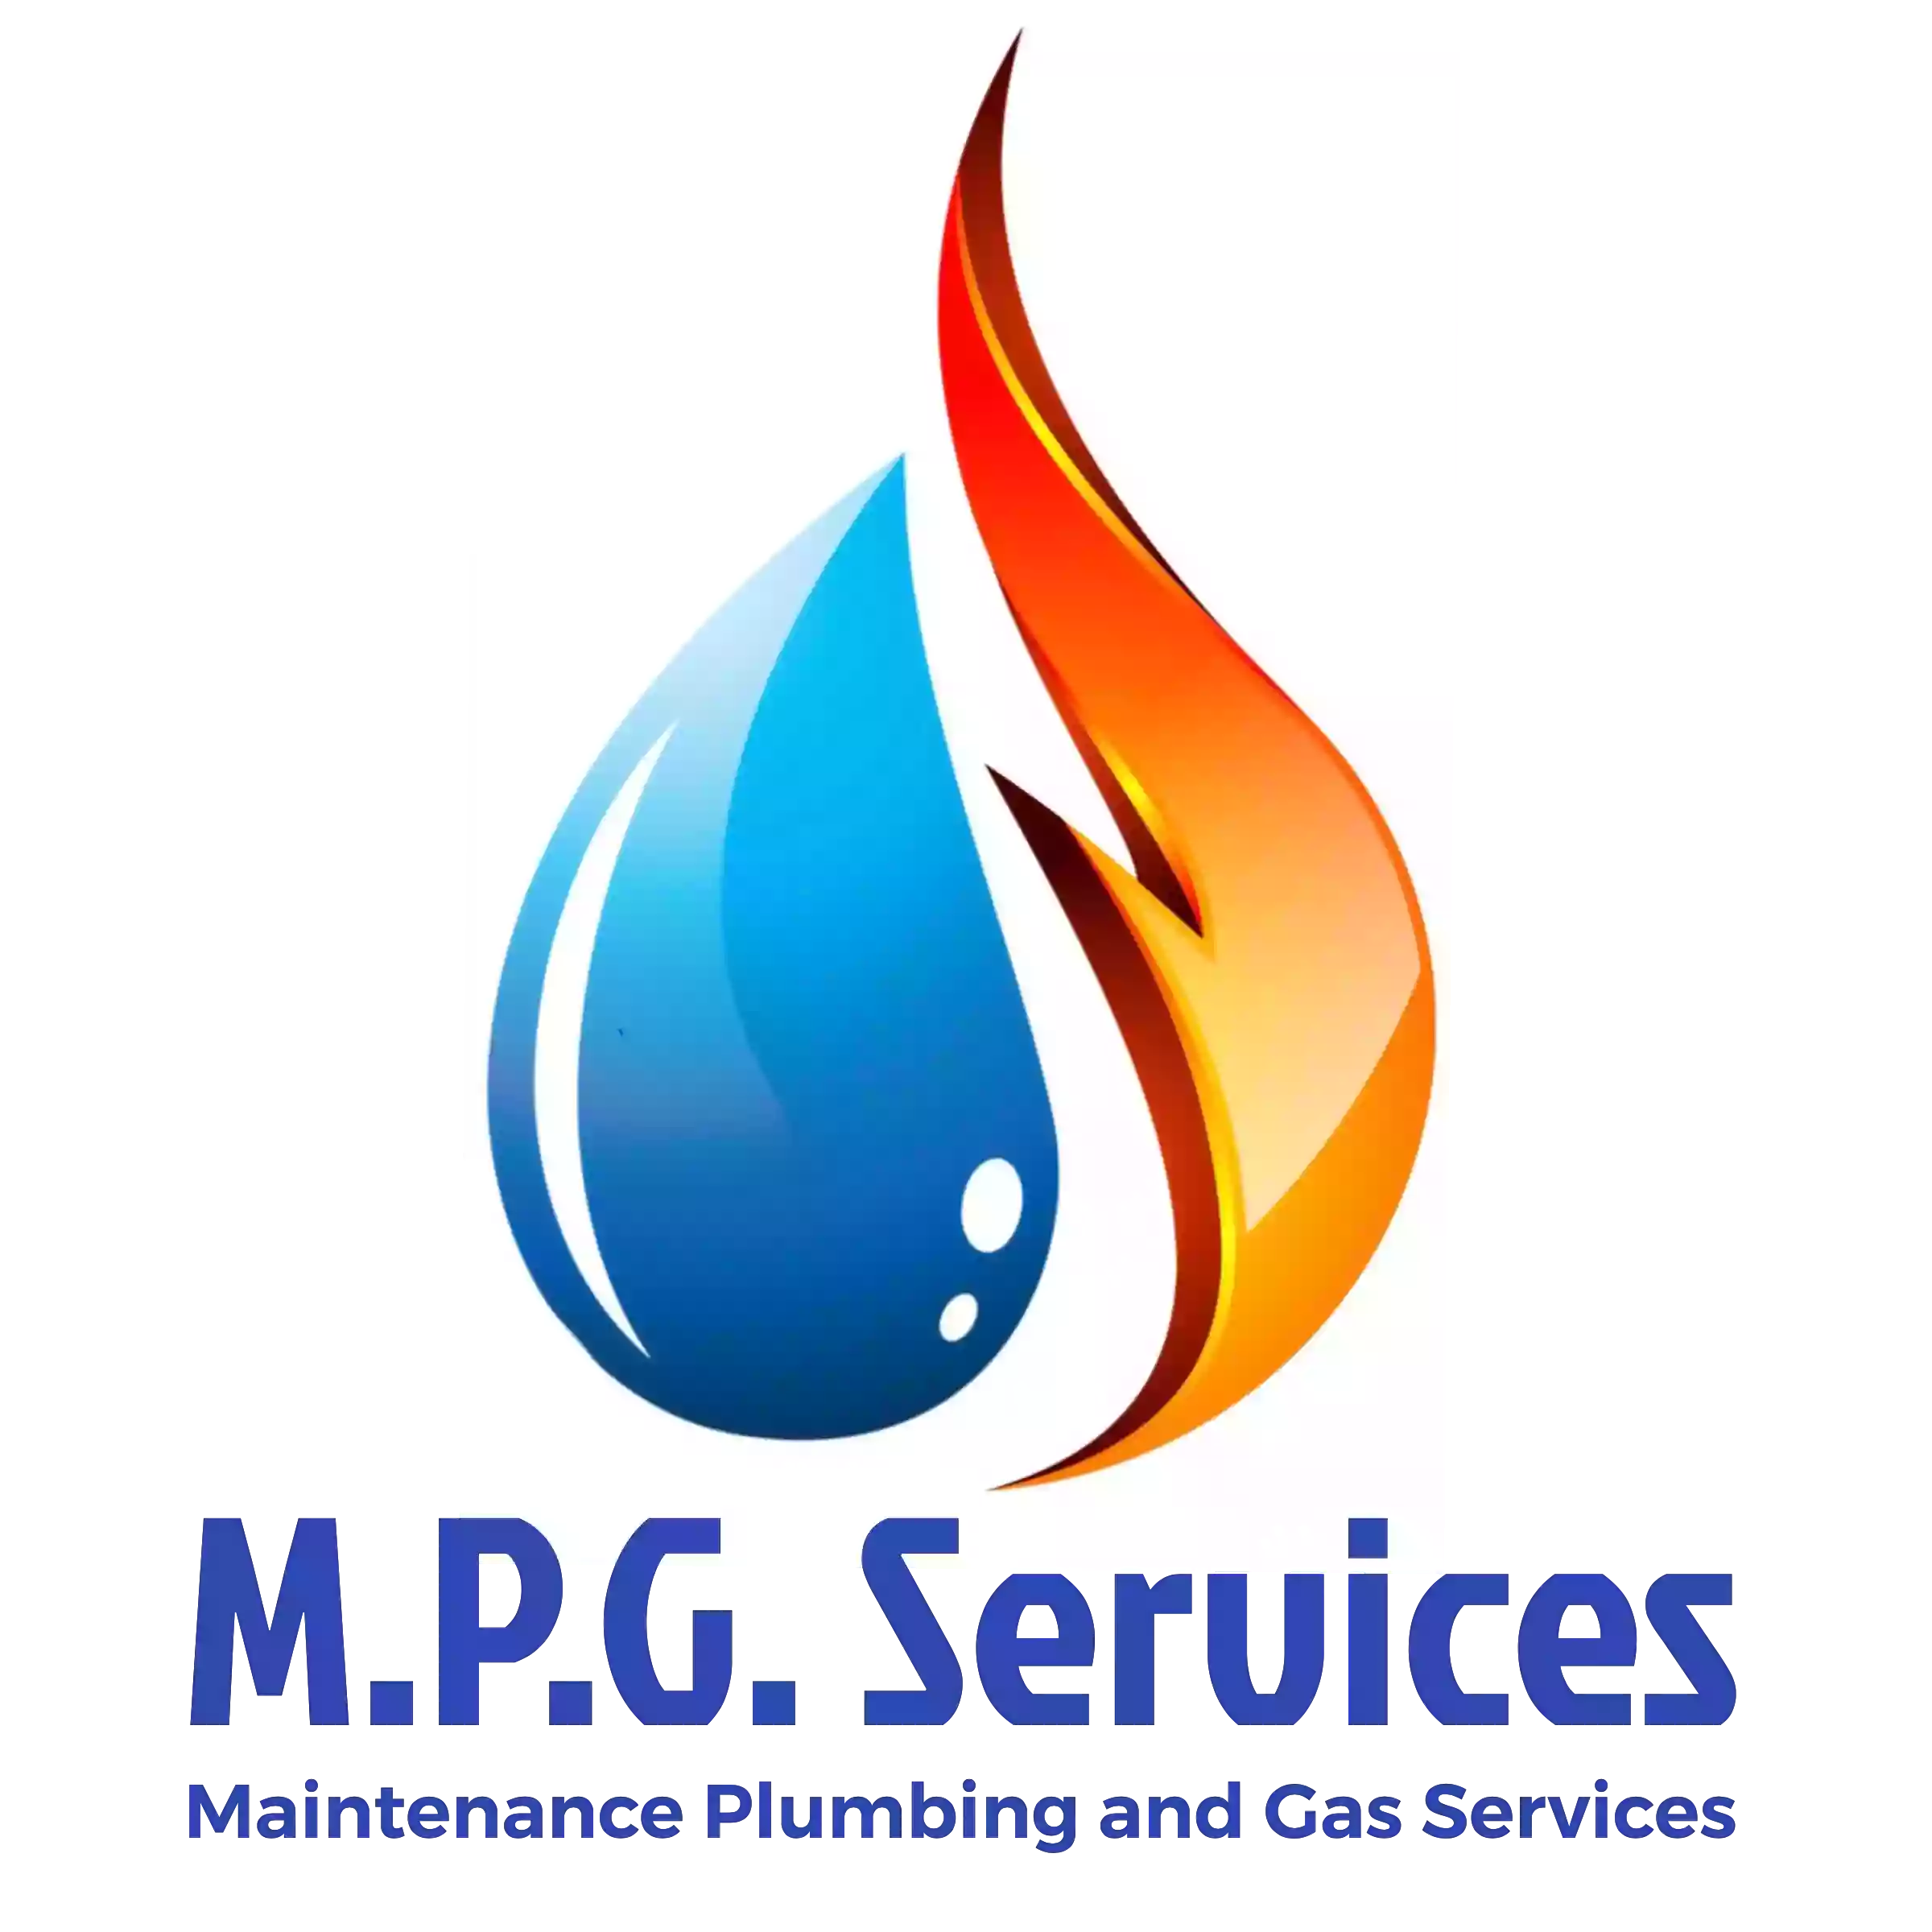 Maintenance Plumbing and Gas Services